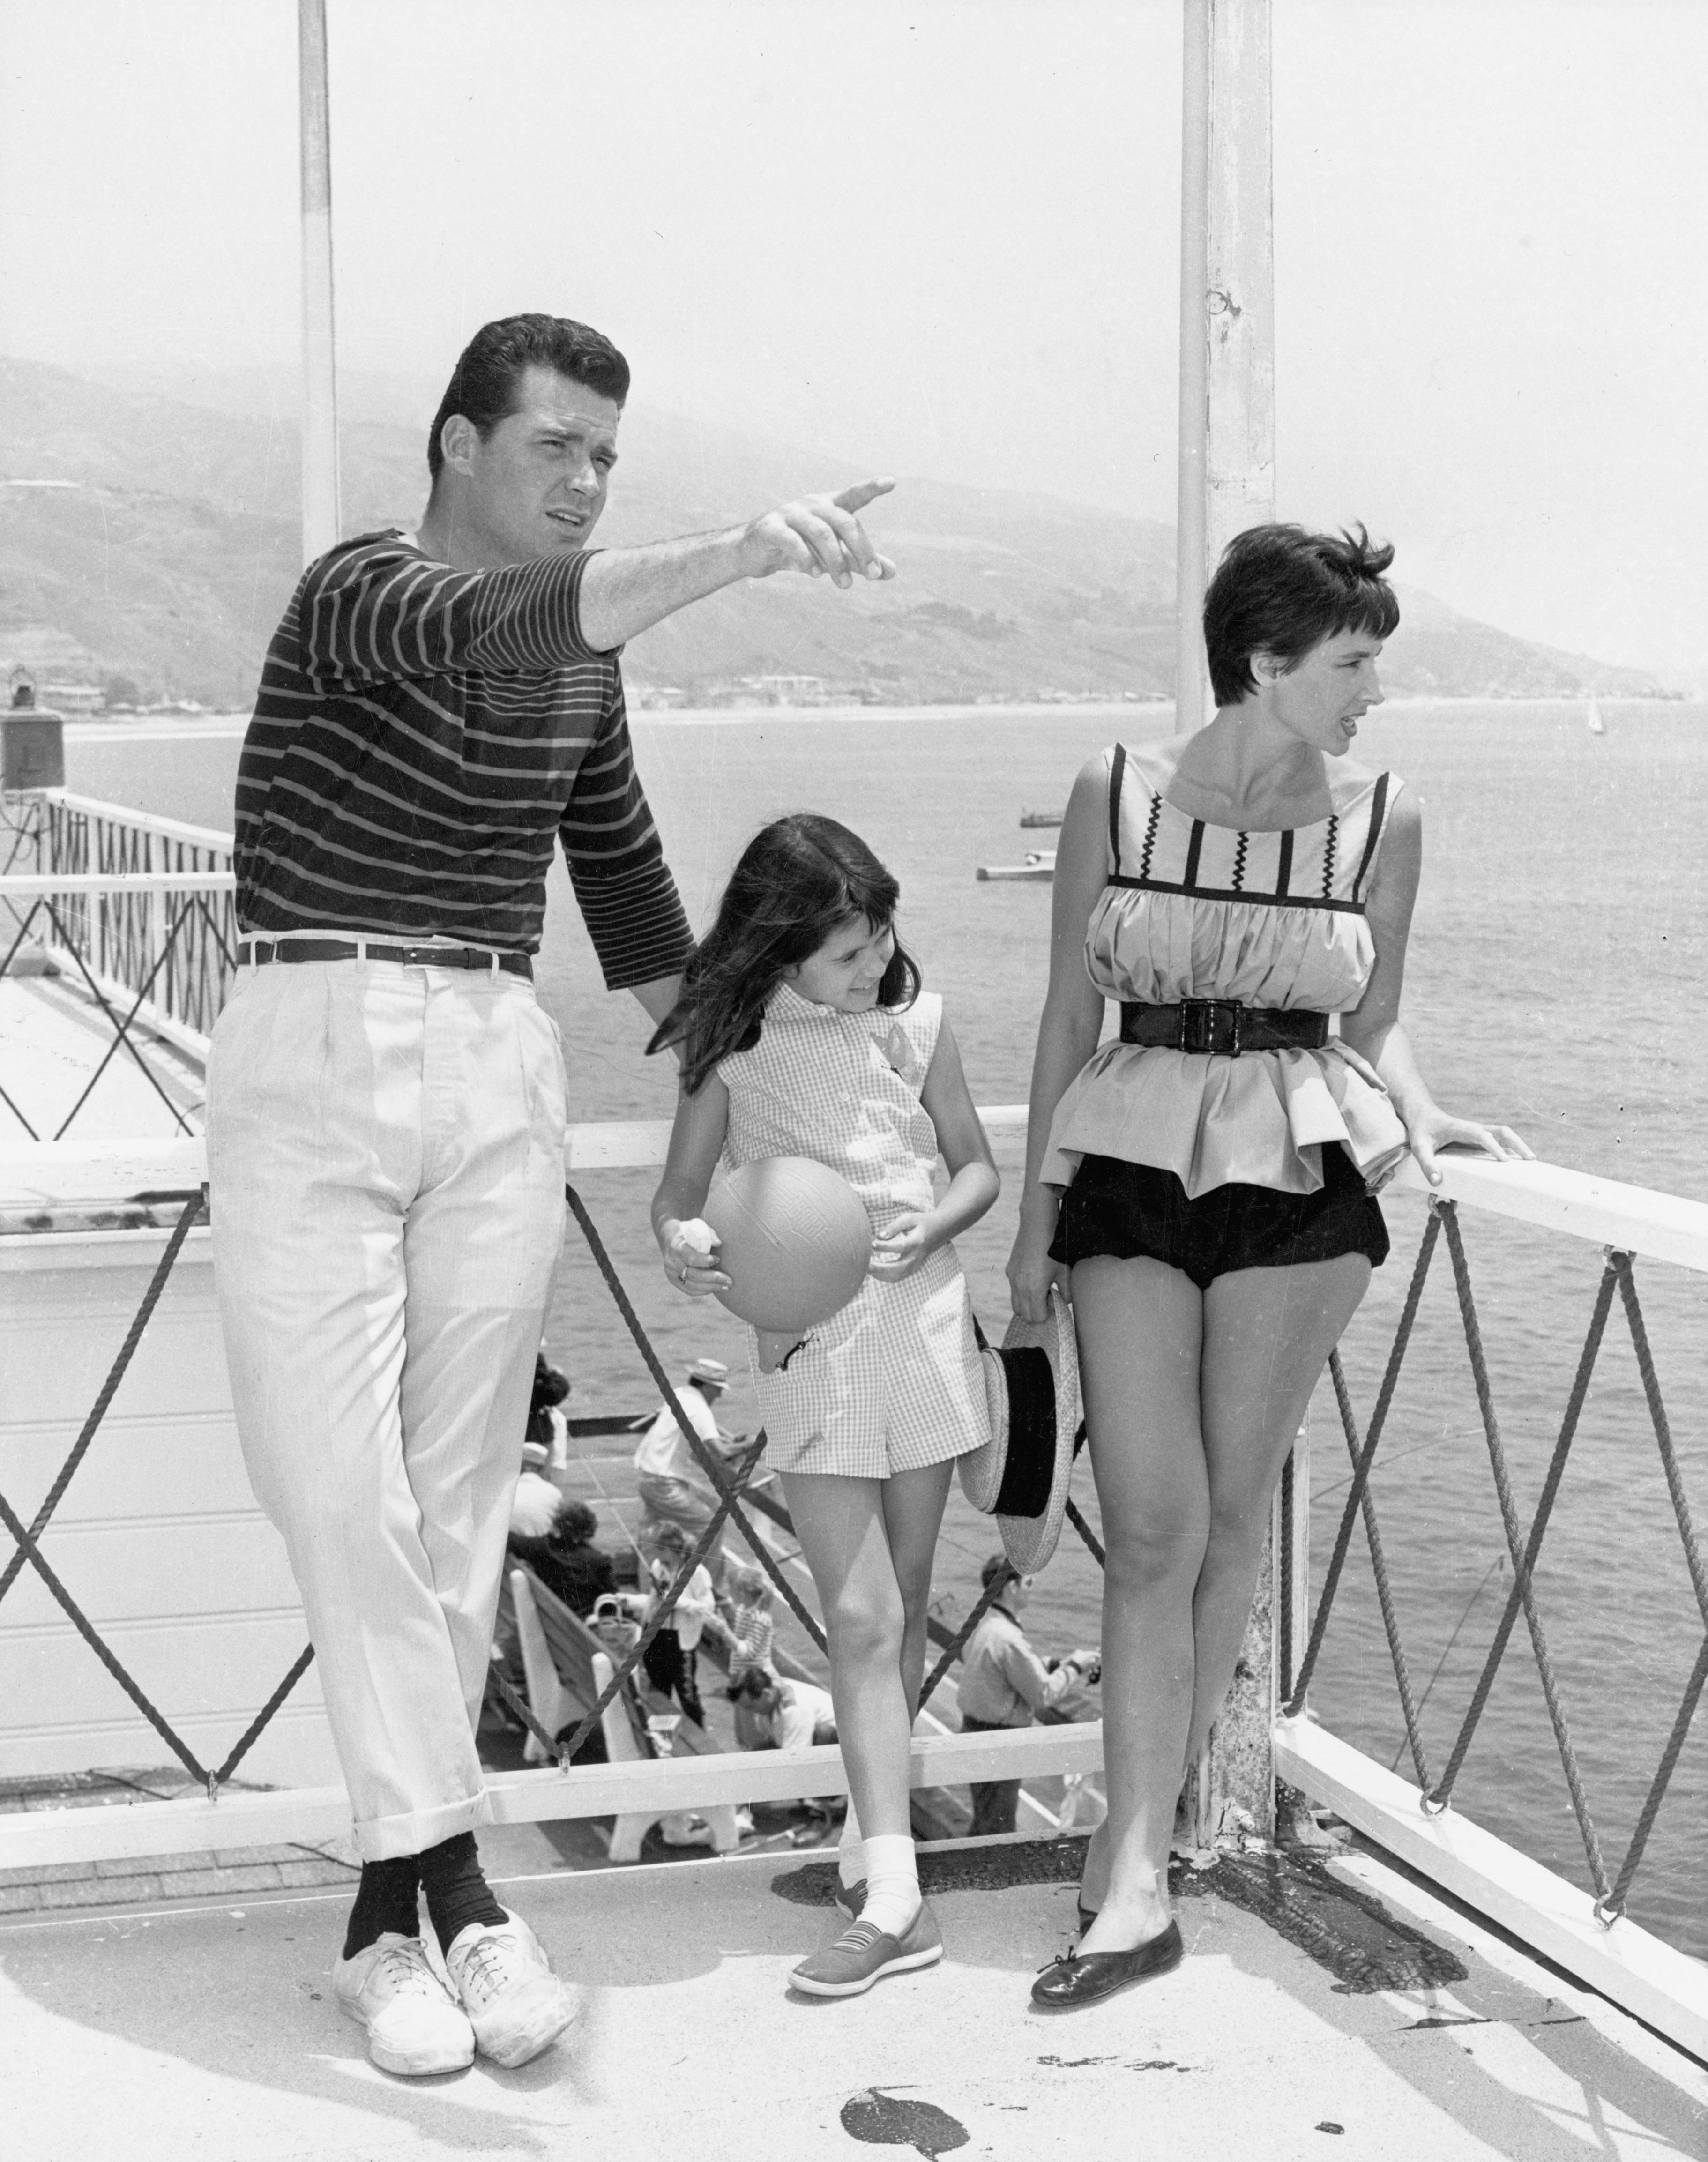 James Garner points while standing on a balcony with his wife, Lois, and their daughter, Kim, 1960s. | Source: Getty Images